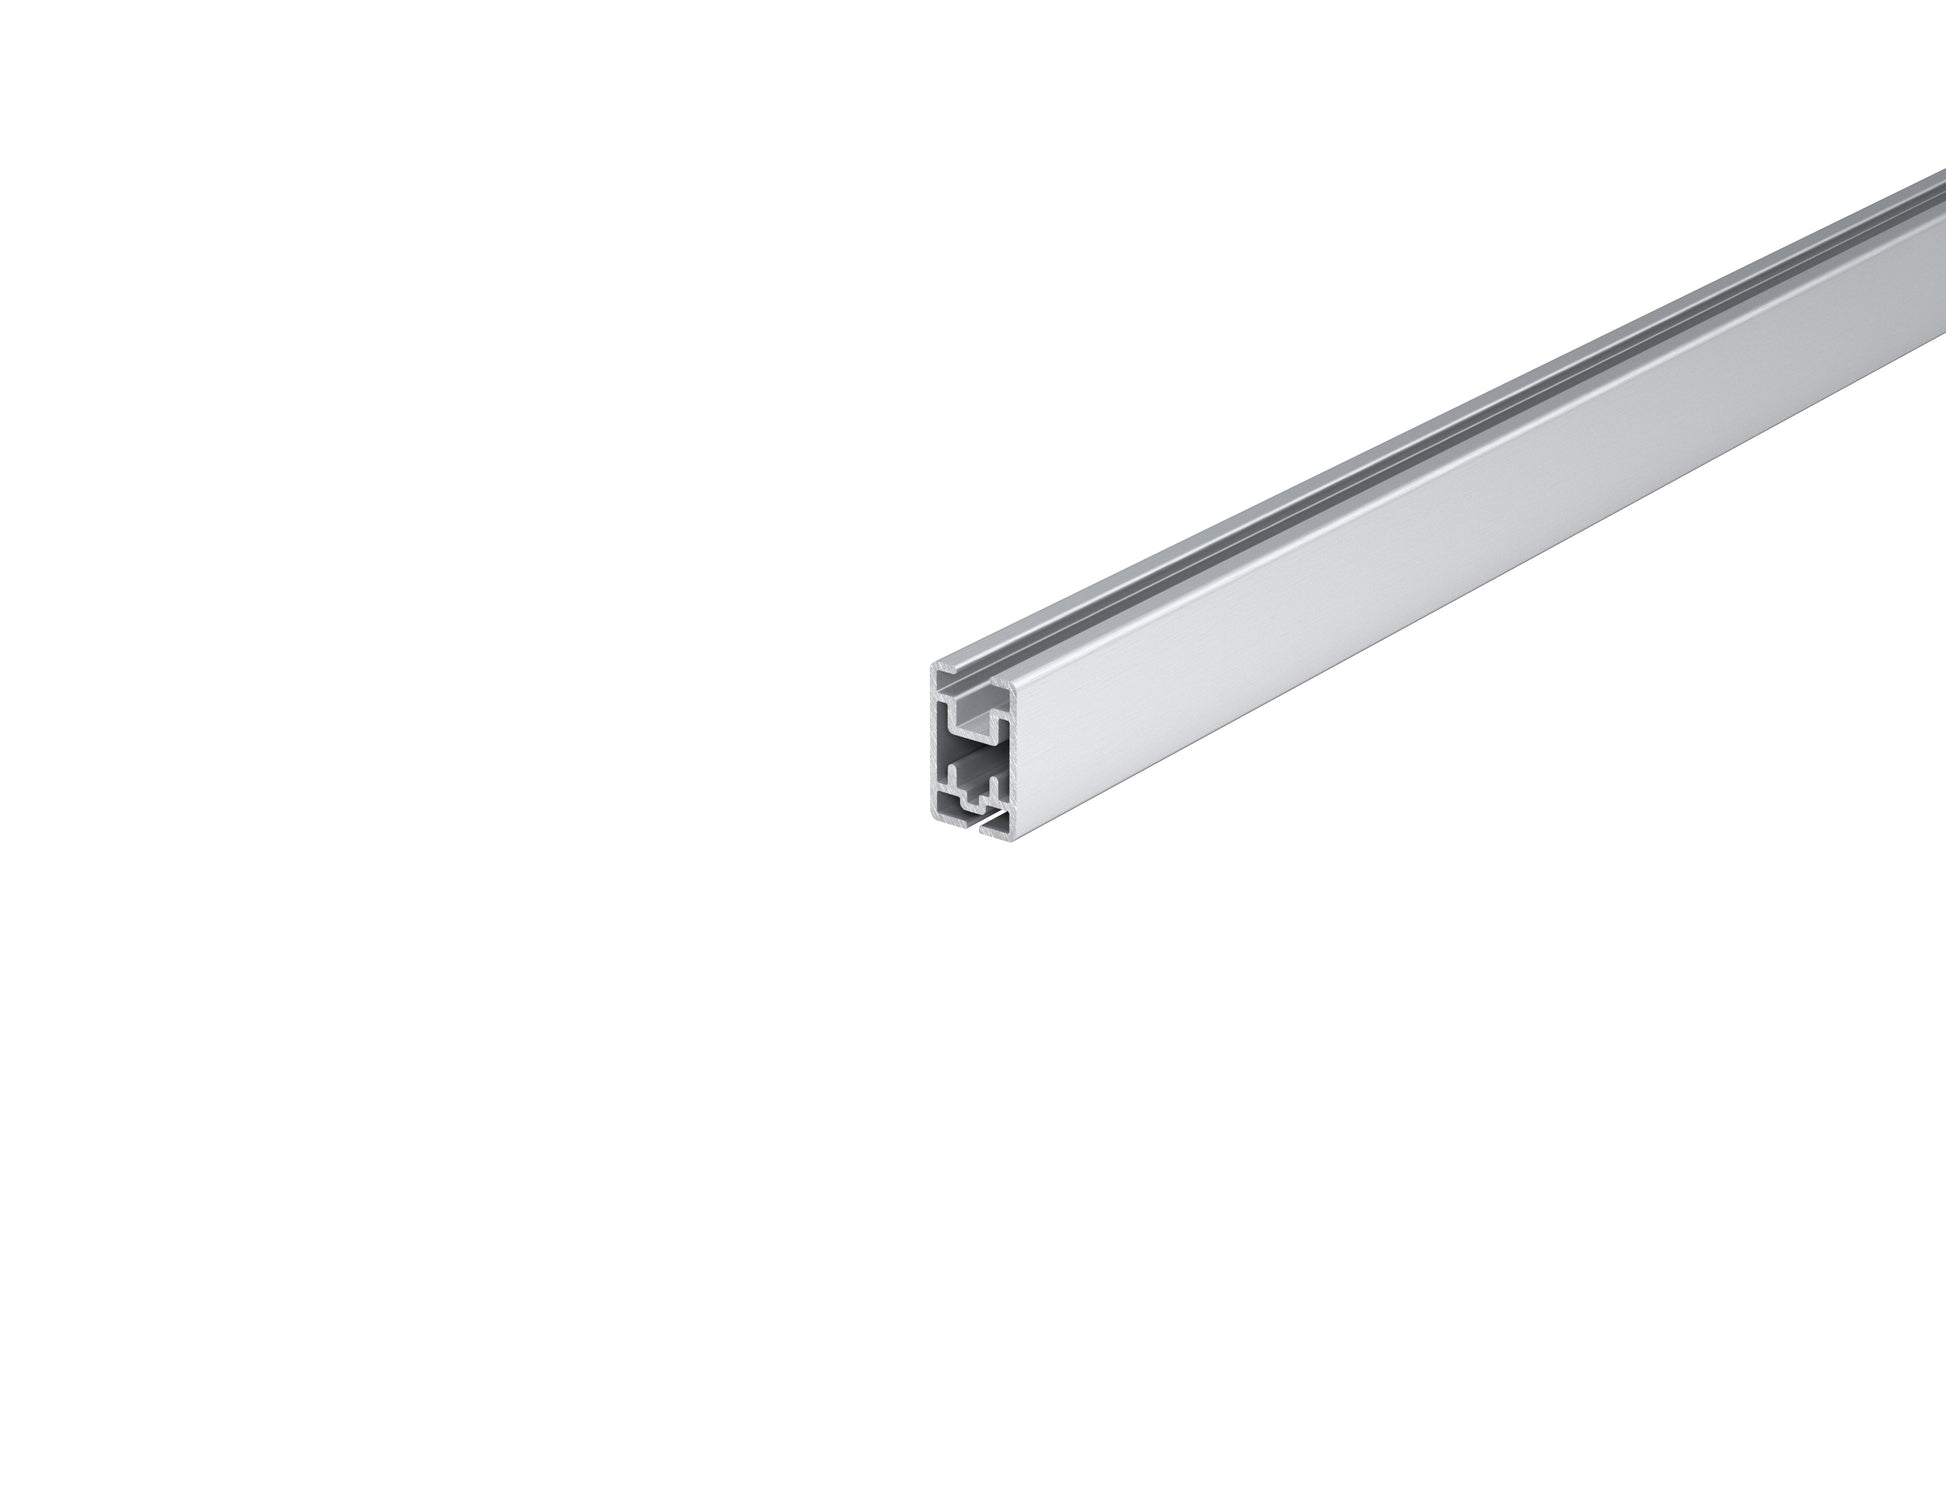 Perfex Rectilinear Extrusion, 1" Profile Drop-in Frame aluminum extrusion for slide-in graphics, buy frame profile cut to lengths or long lengths up to 144" long